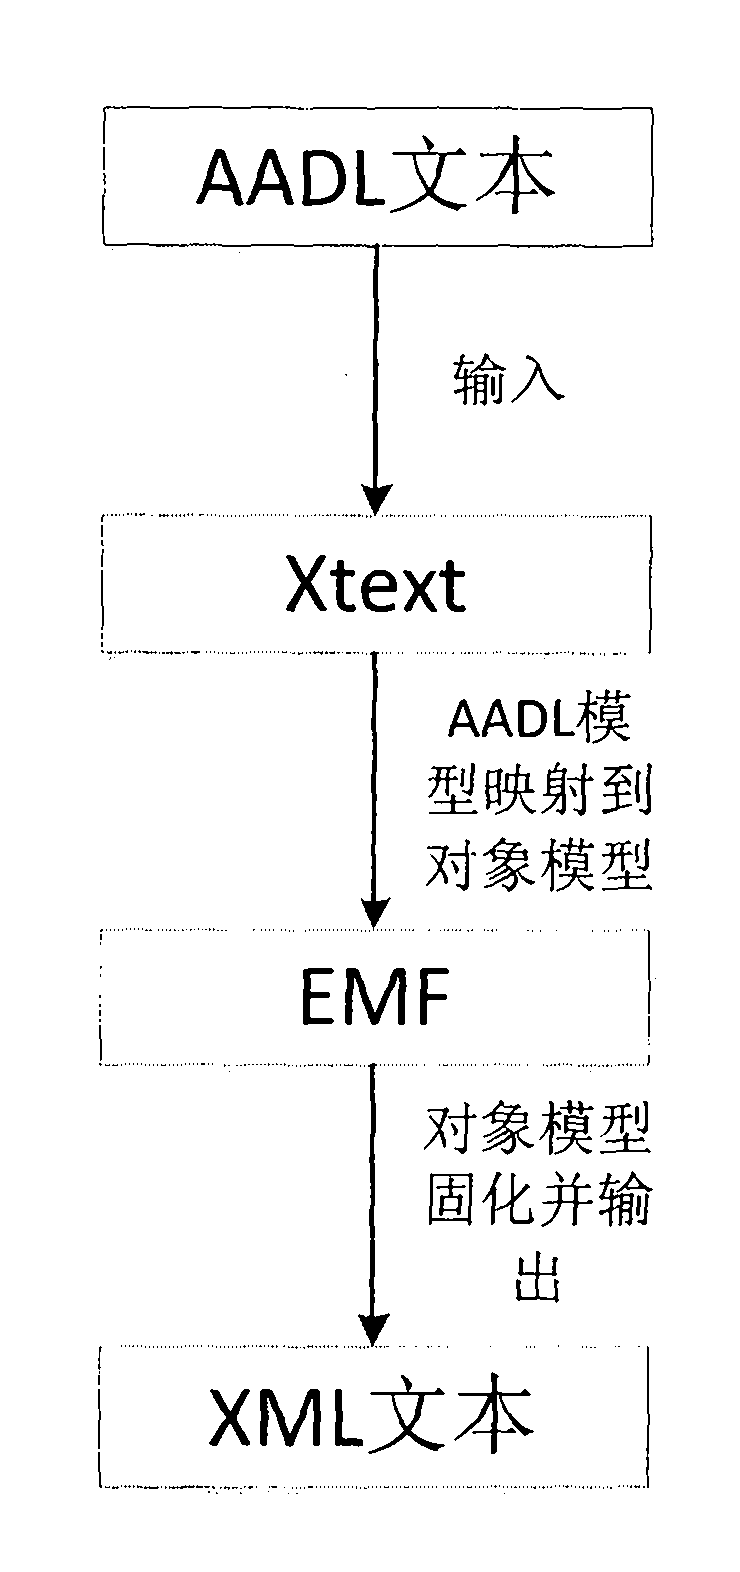 Method for nondestructively converting AADL (architecture analysis and design language) into XML (extensible markup language)